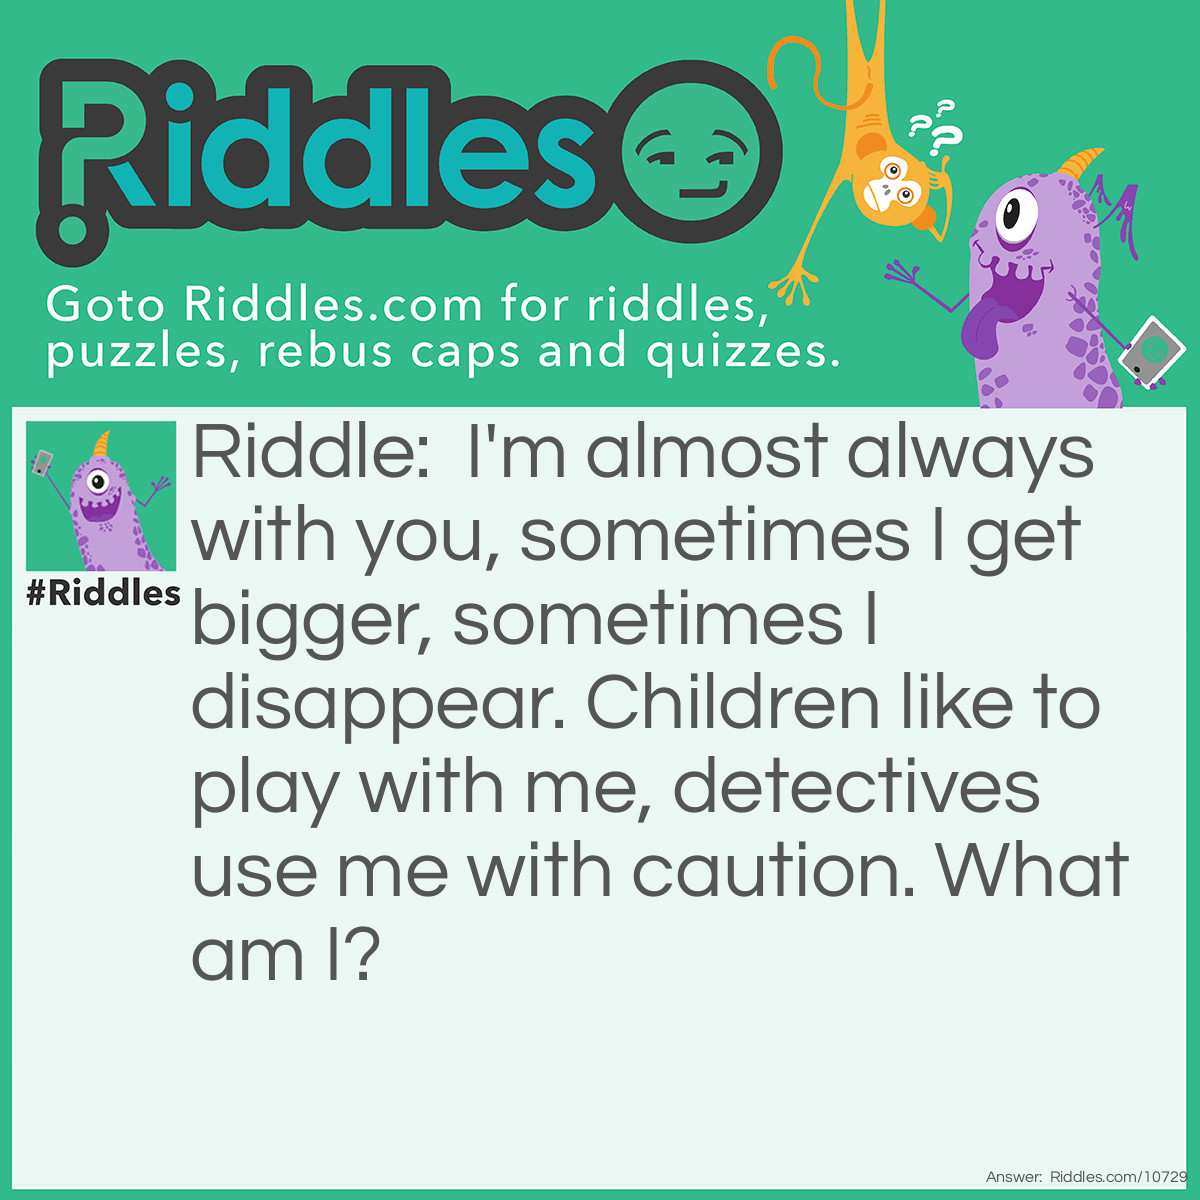 Riddle: I'm almost always with you, sometimes I get bigger, sometimes I disappear. Children like to play with me, detectives use me with caution. What am I? Answer: A shadow.